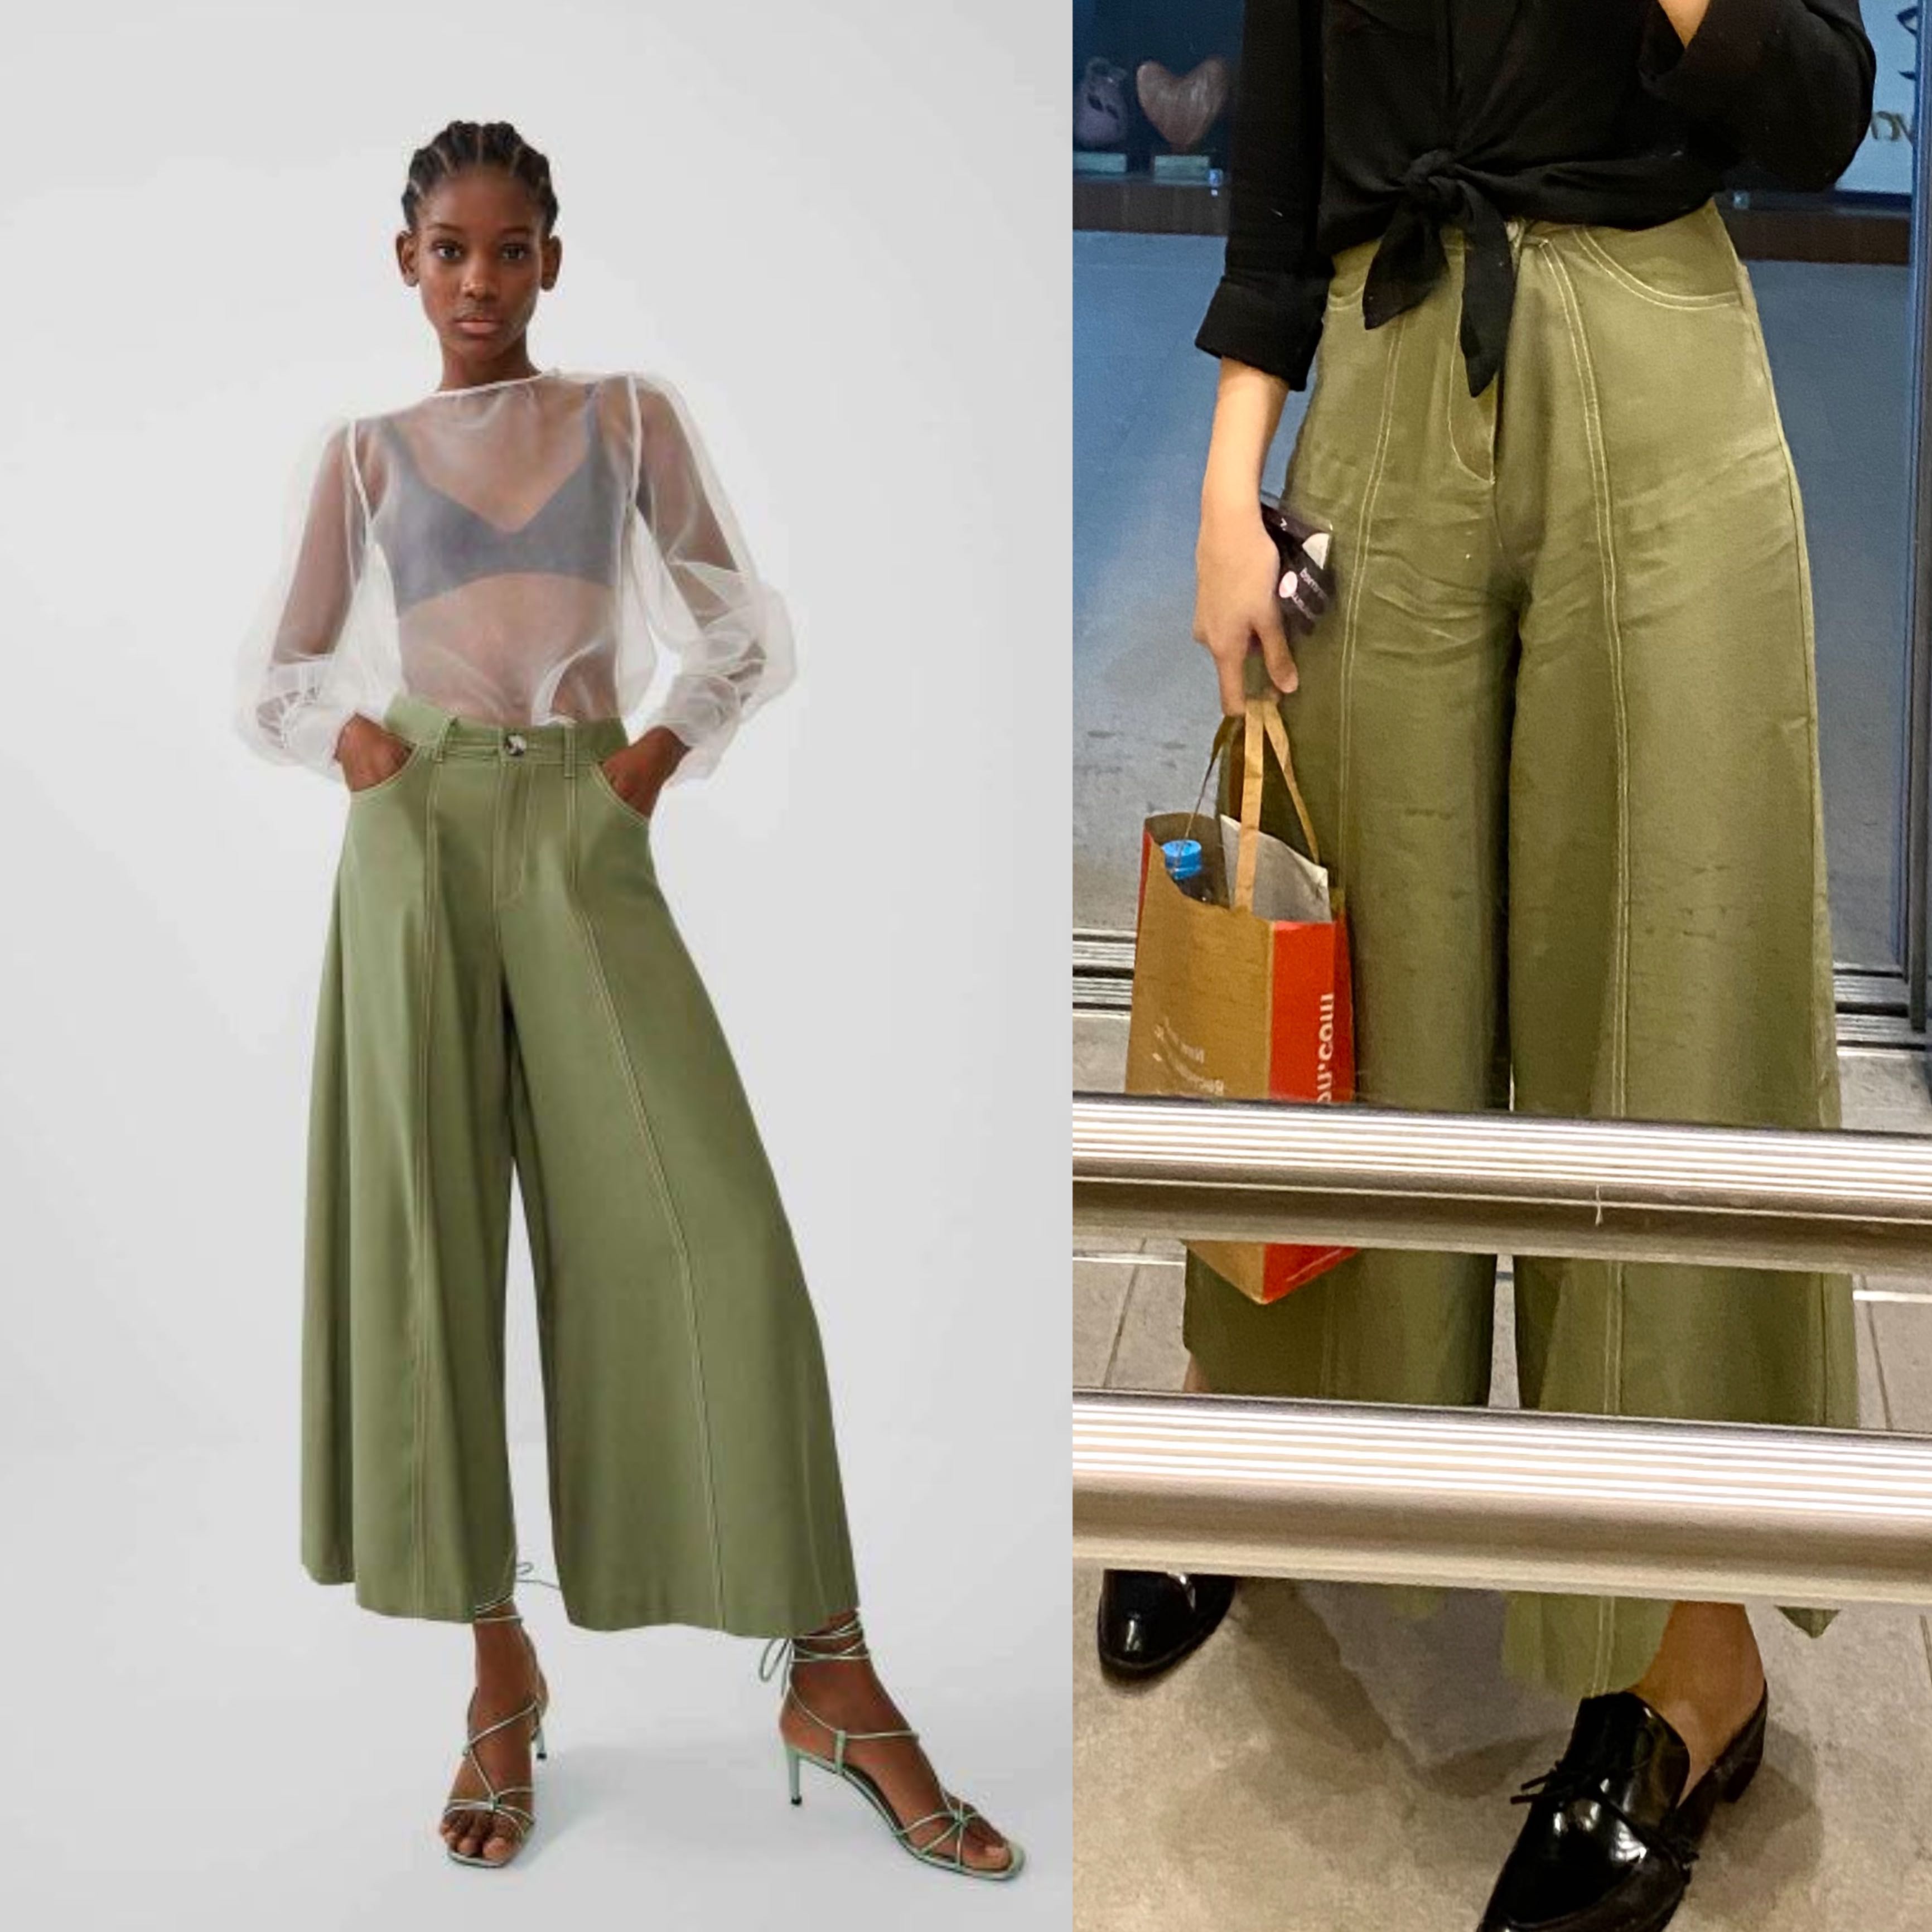 ZARA / HIGH-WAISTED PANTS - Item available in more colors | High waisted  culottes, High waisted trousers, Culottes zara